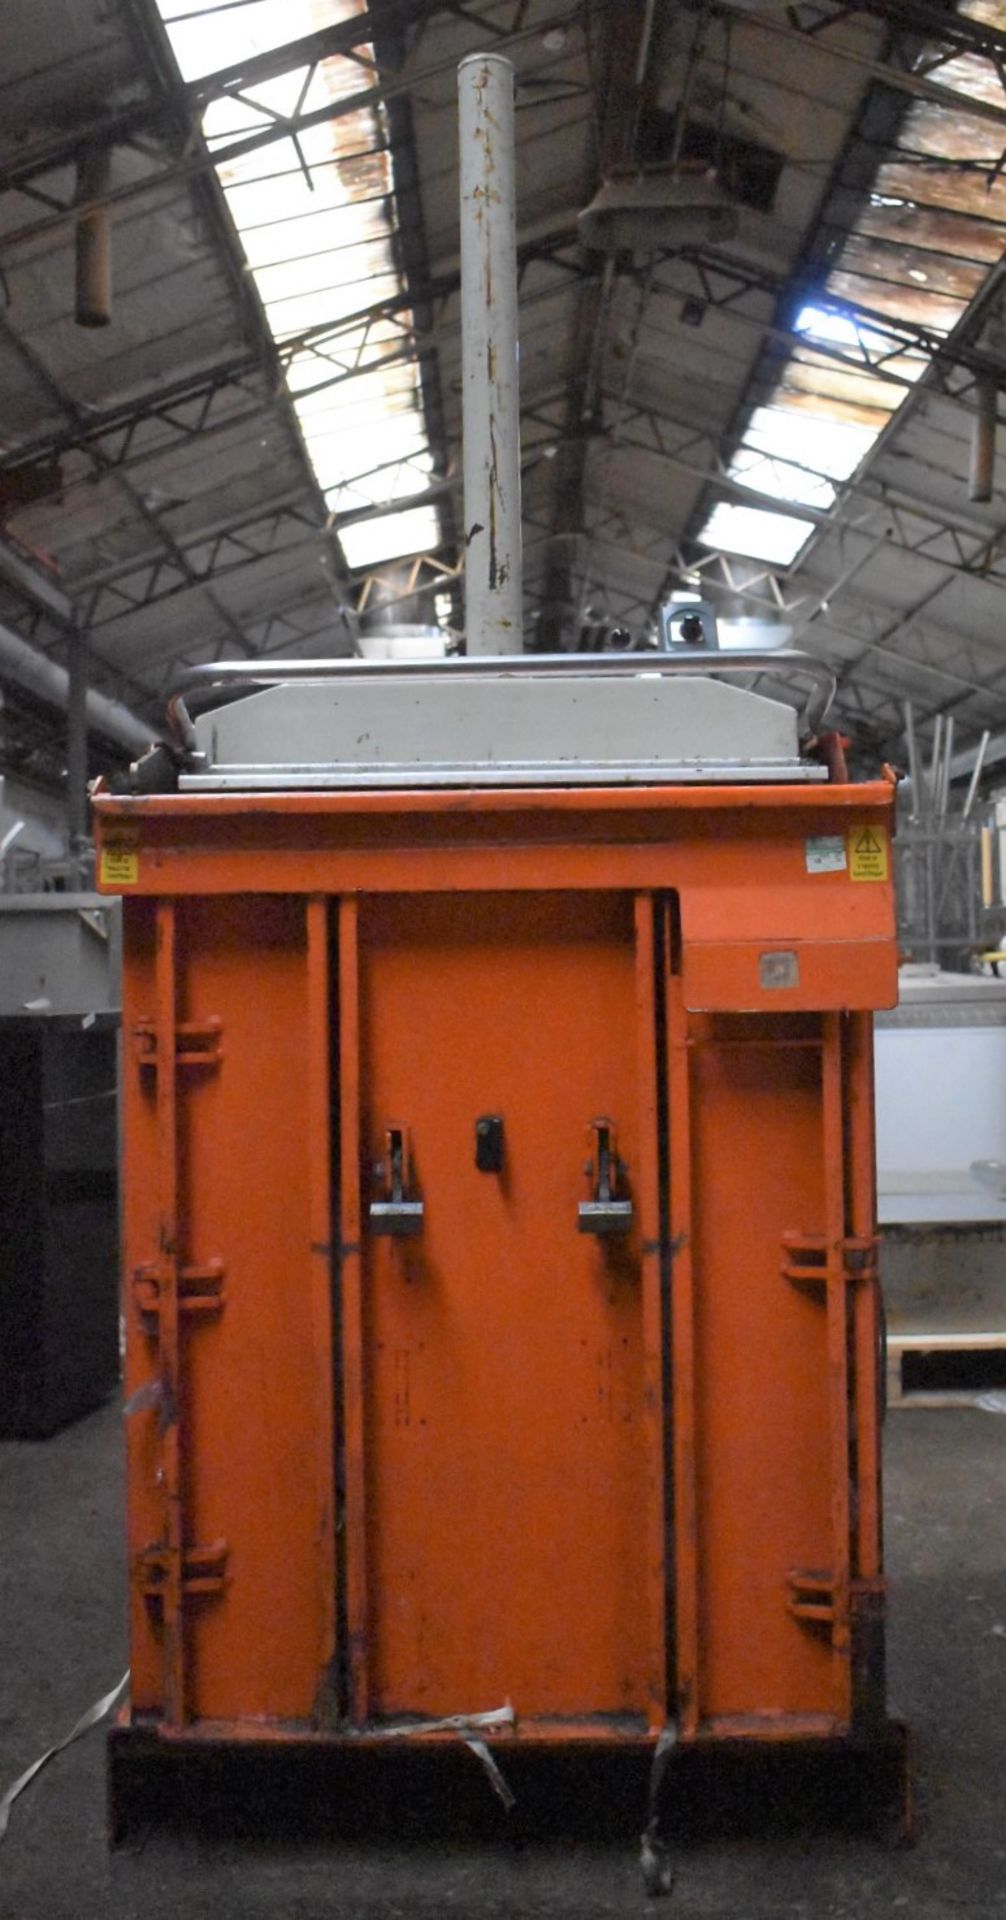 1 x Orwak 5010 Hydraulic Press Compact Cardboard Baler - Used For Compacting Recyclable or Non- - Image 9 of 15